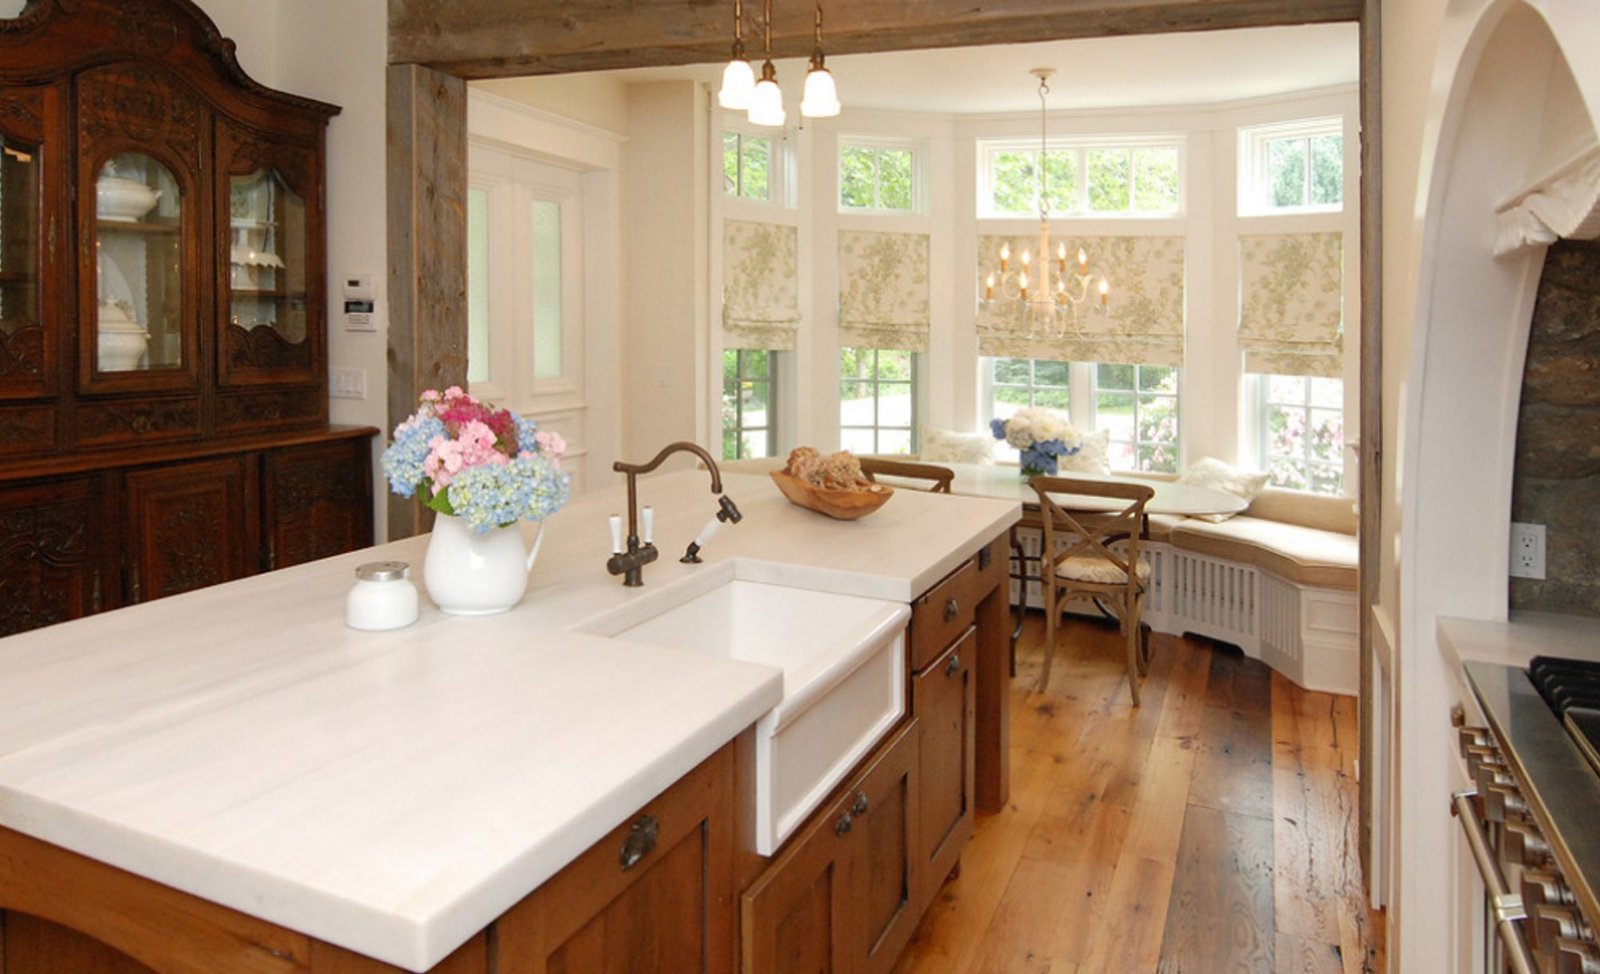 How to Clean a White Kitchen Countertop